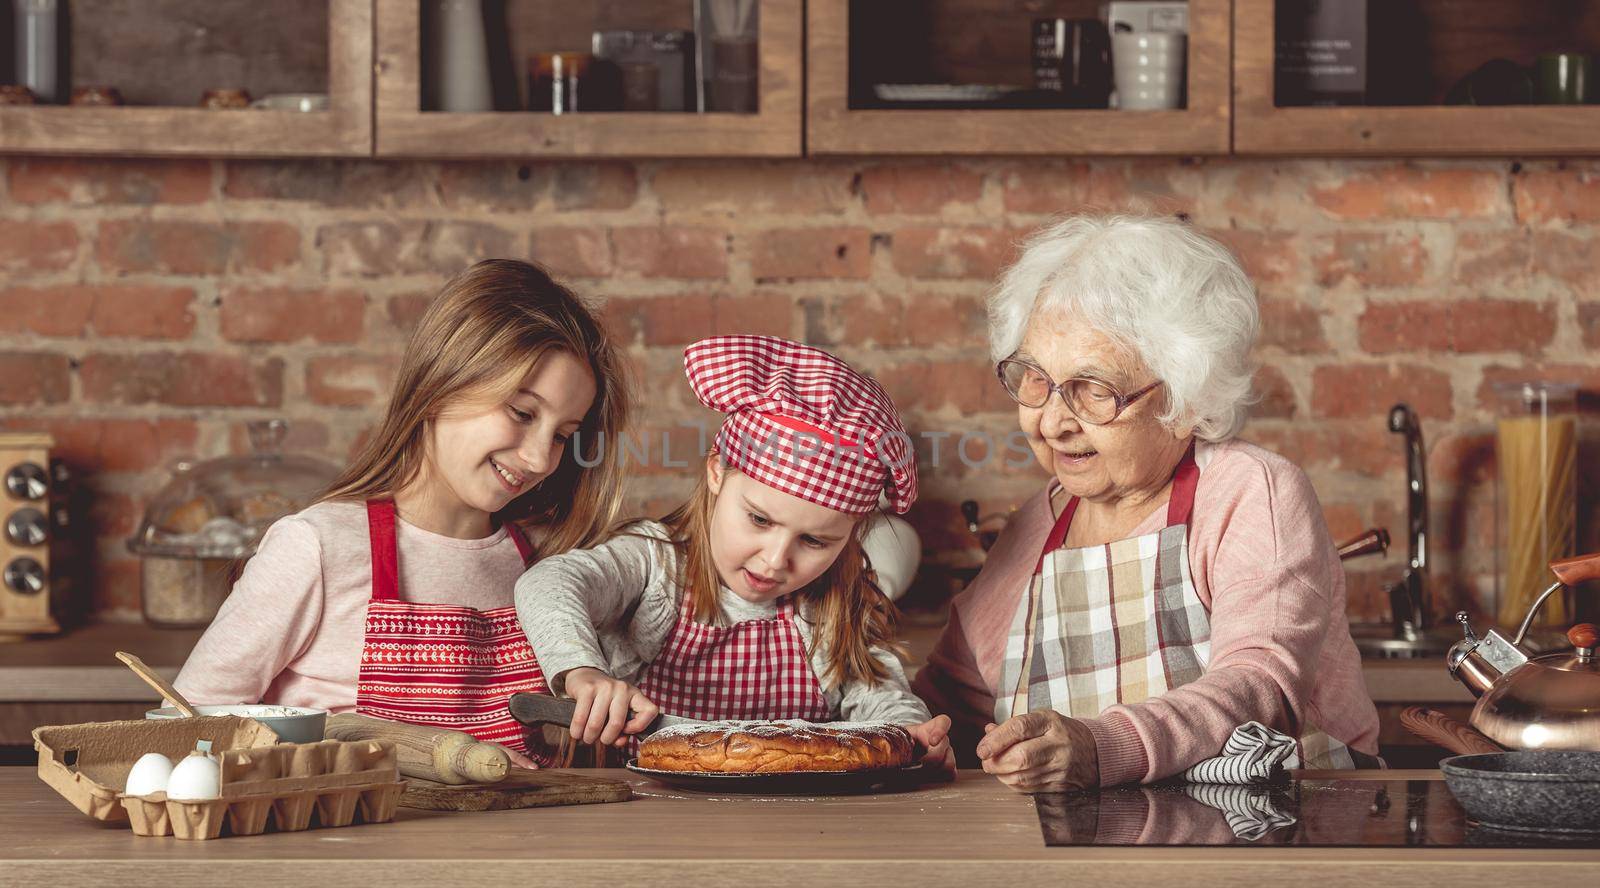 Granny with her granddaughters tasting pie by tan4ikk1